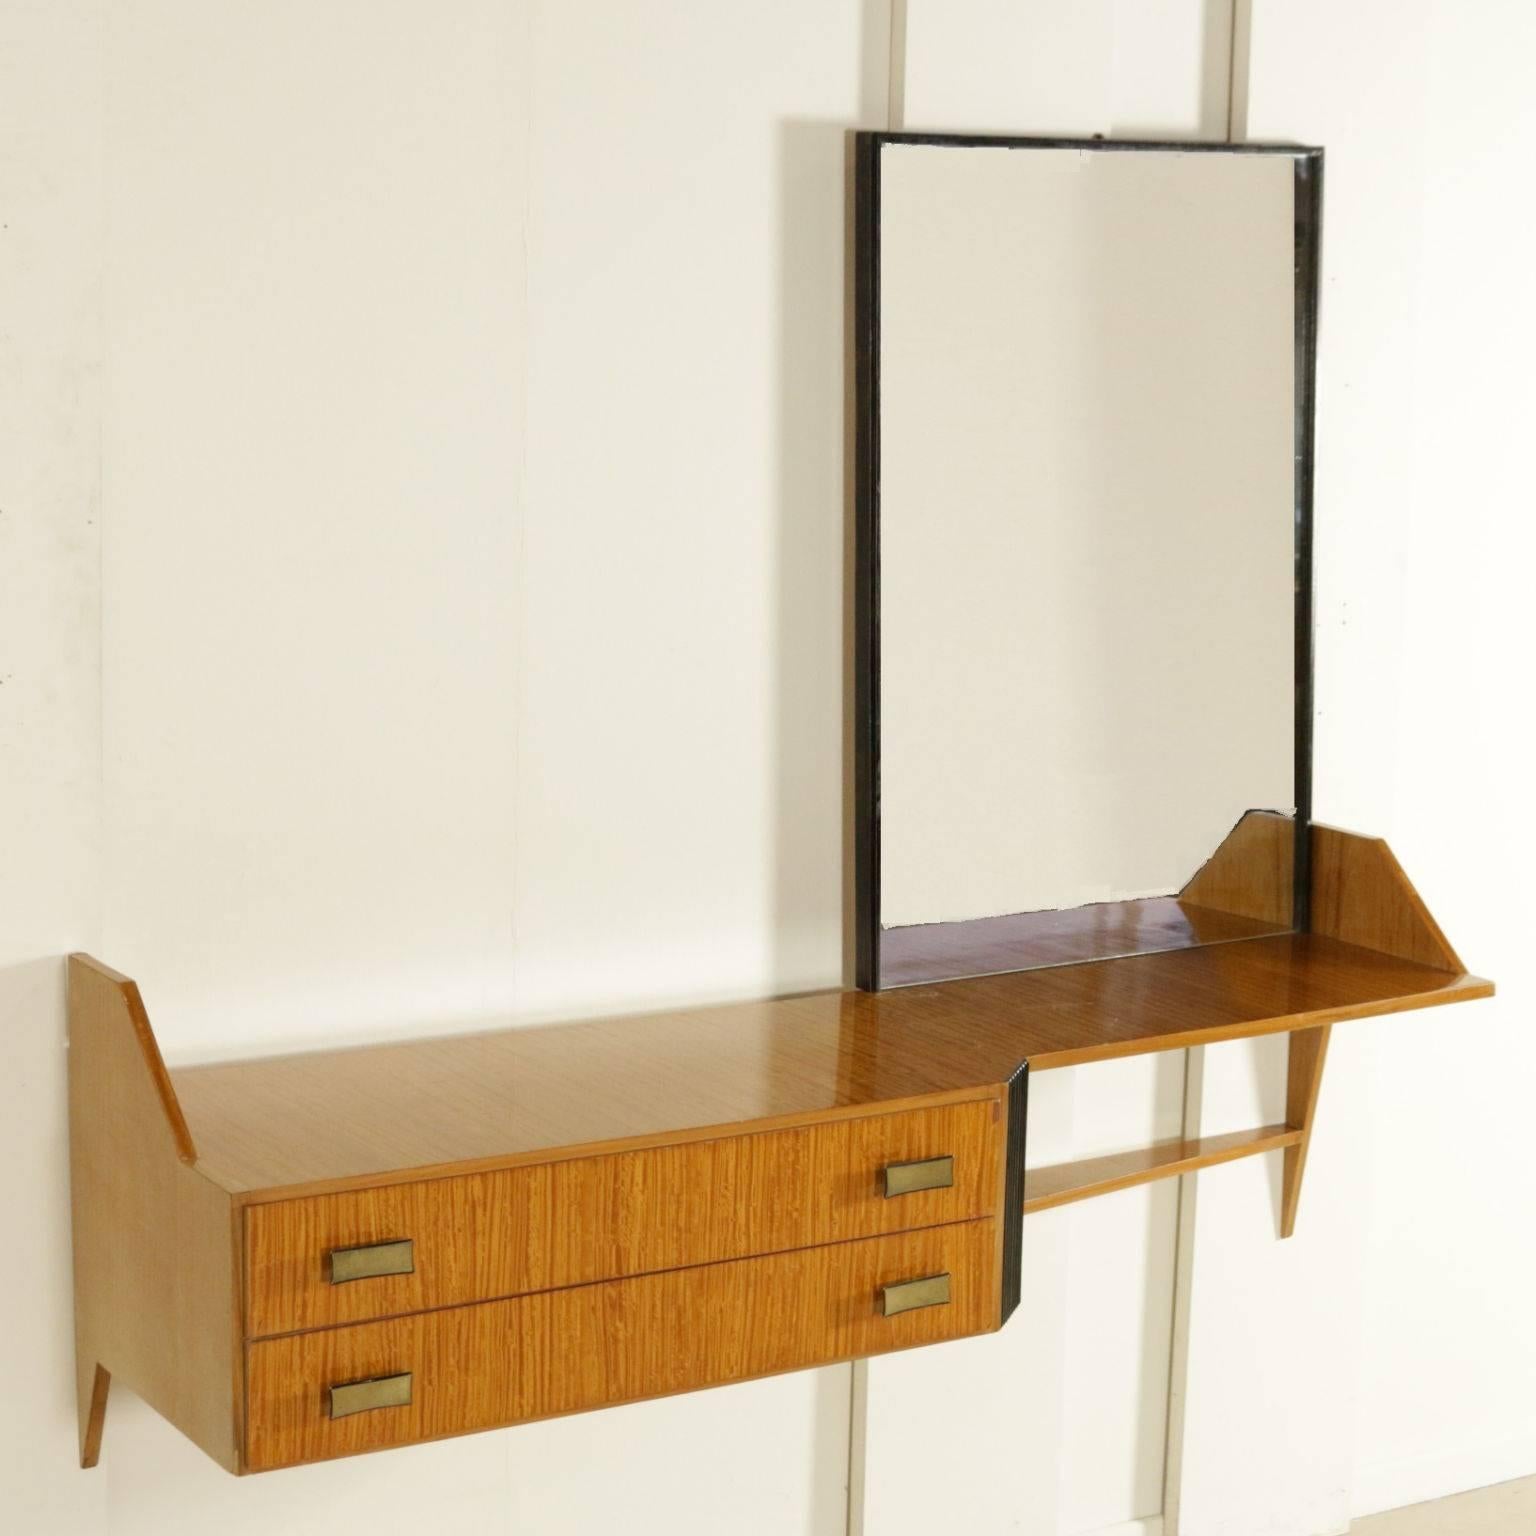 Dressing table with mirror and drawers, maple veneer, brass handles. Manufactured in Italy, 1950s-1960s.